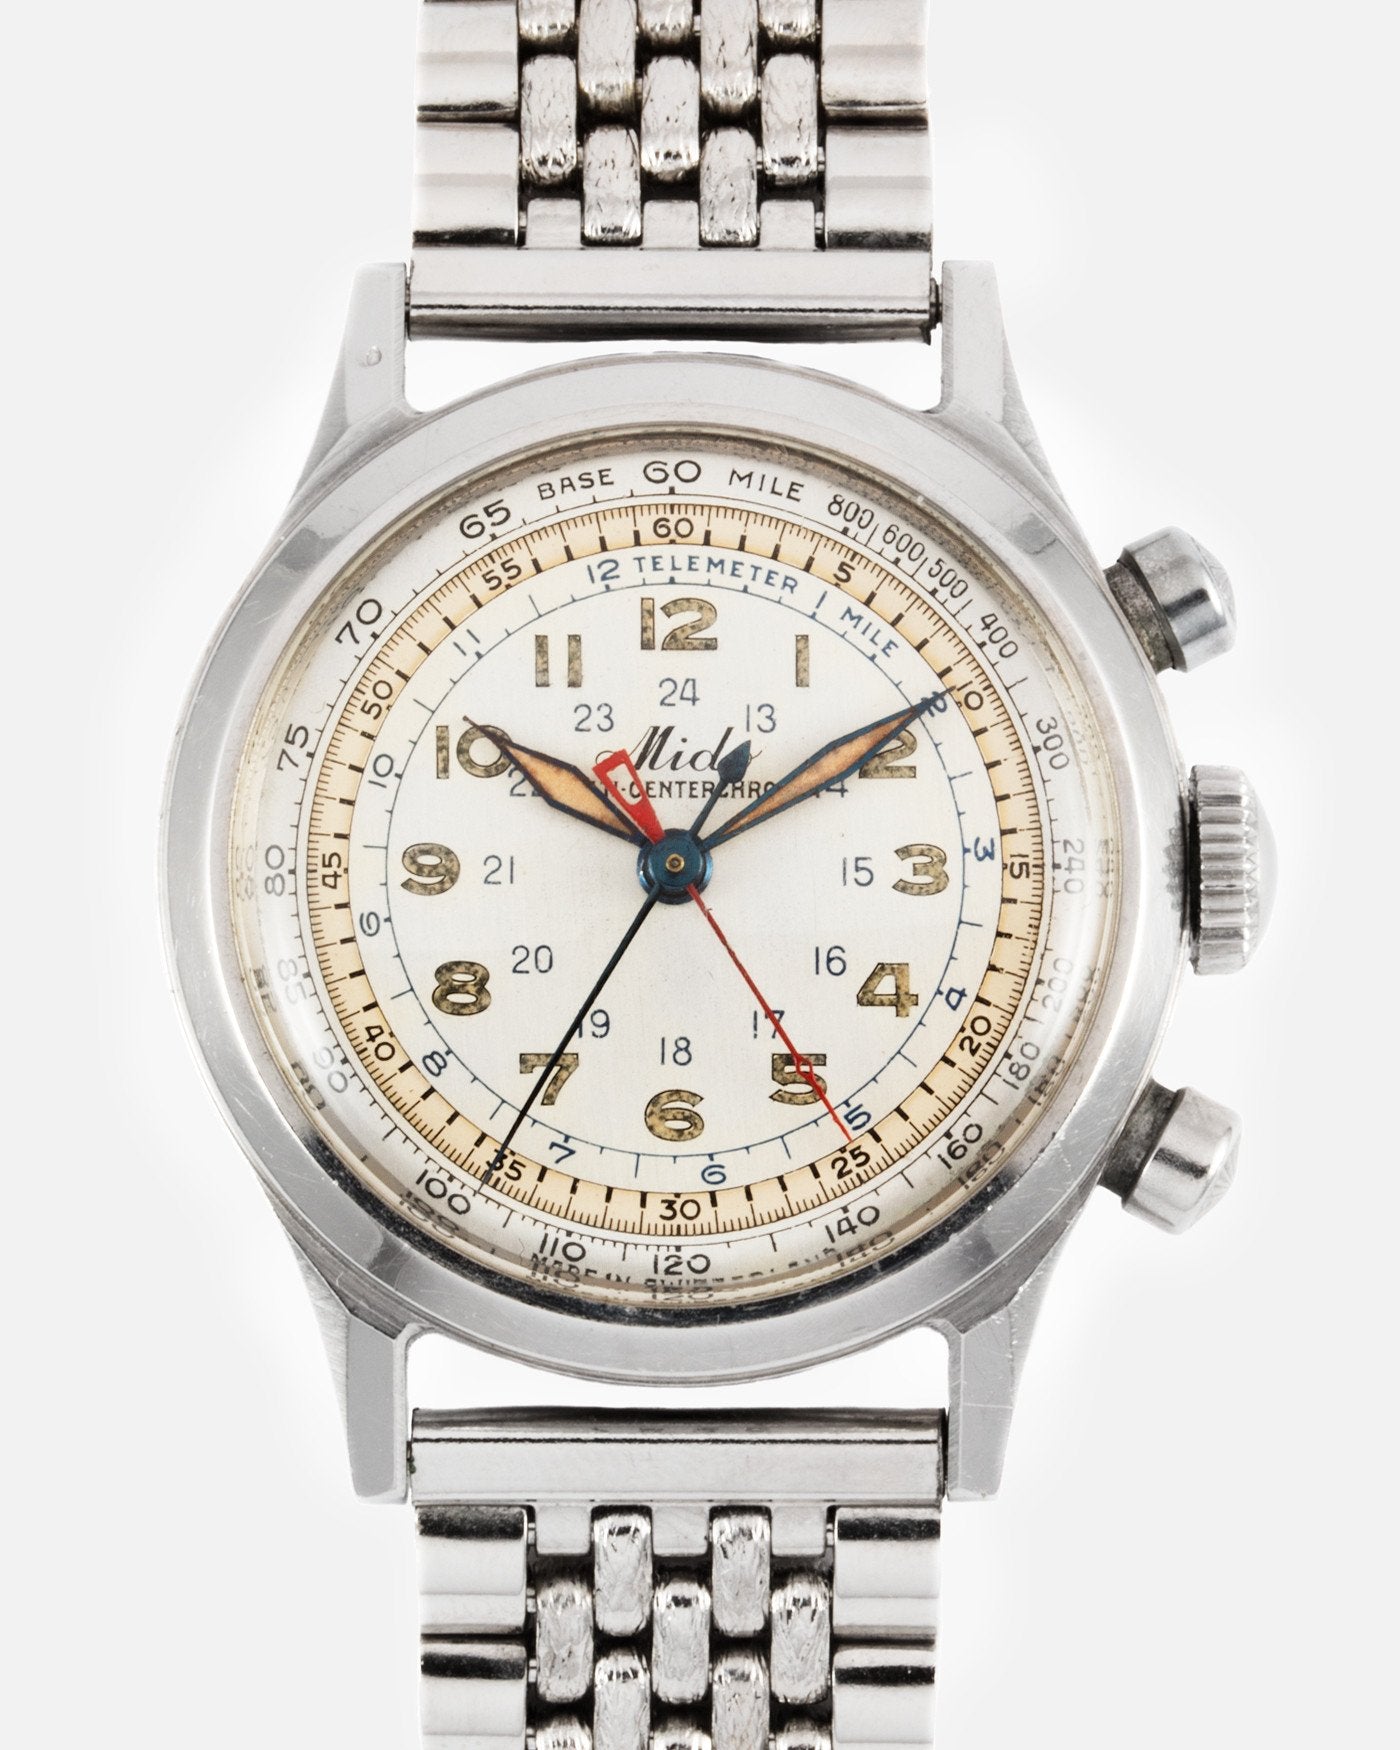 Mido Micro Centrechrono chronograph with a borgel water proof case for A Collected Man London